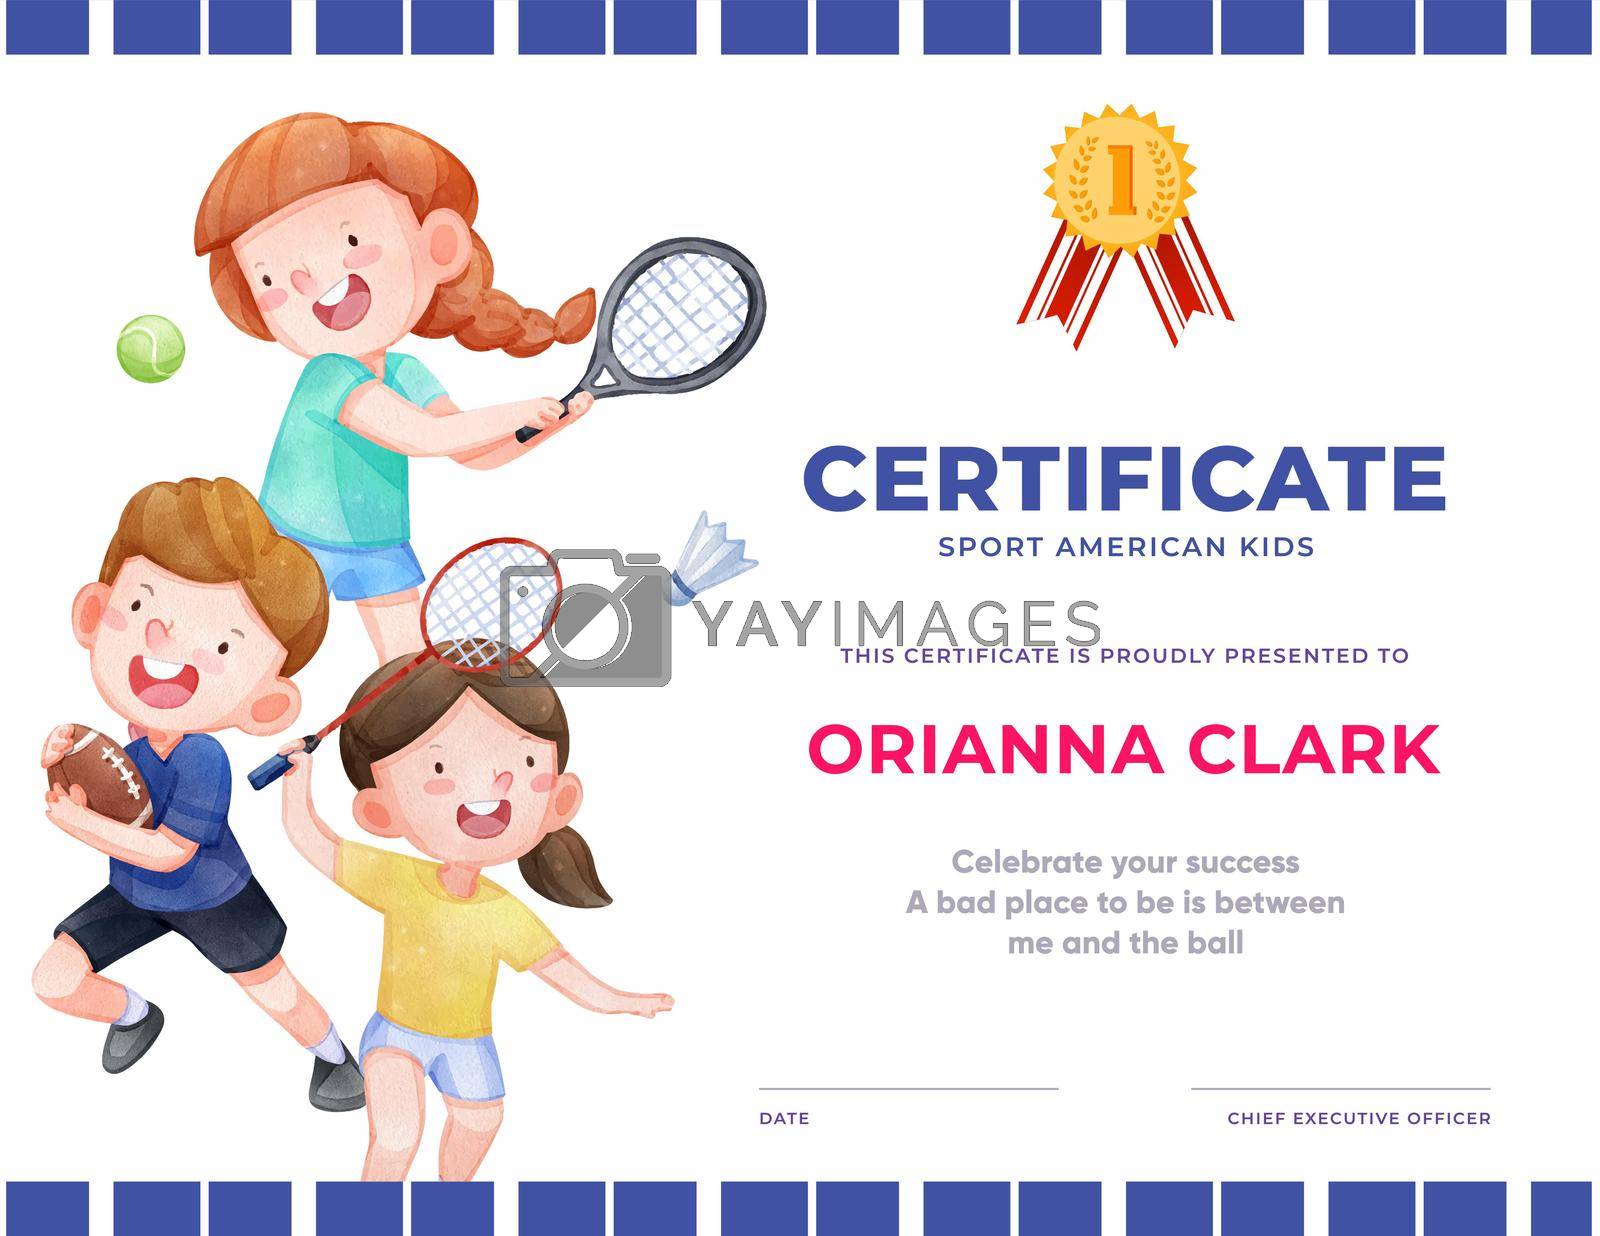 Royalty free image of Certificate template with American sport kids concept,watercolor style by Photographeeasia